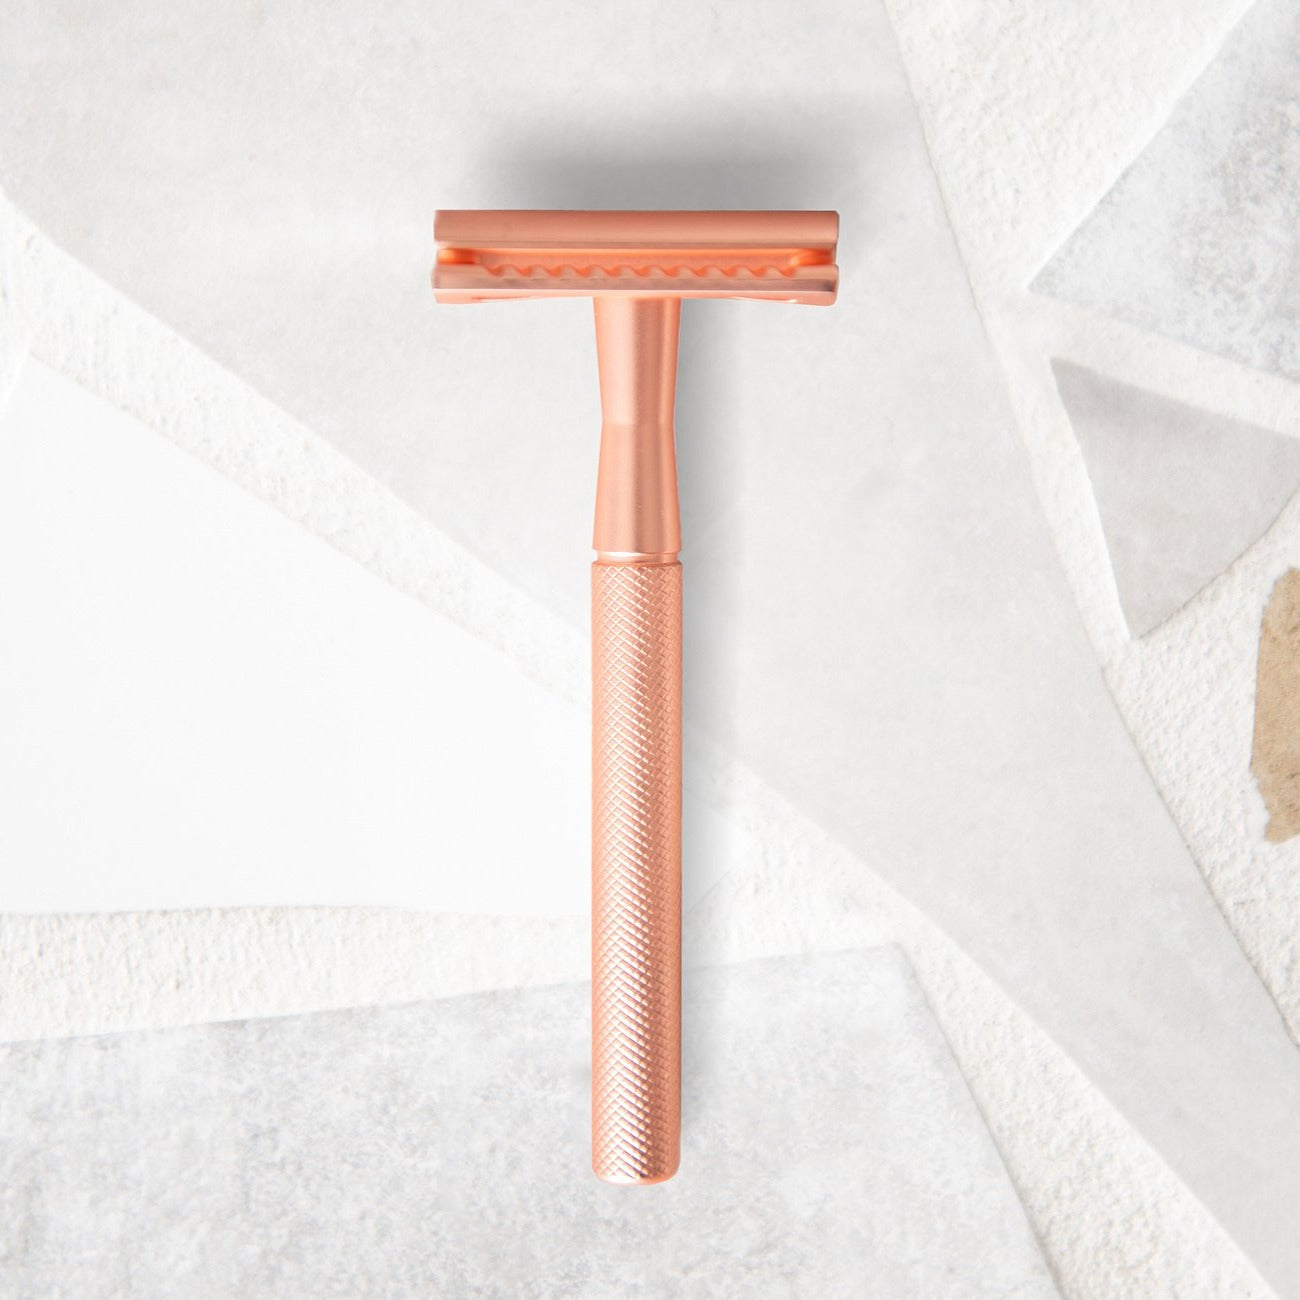 Caliwoods Long Handle Copper Safety Razor